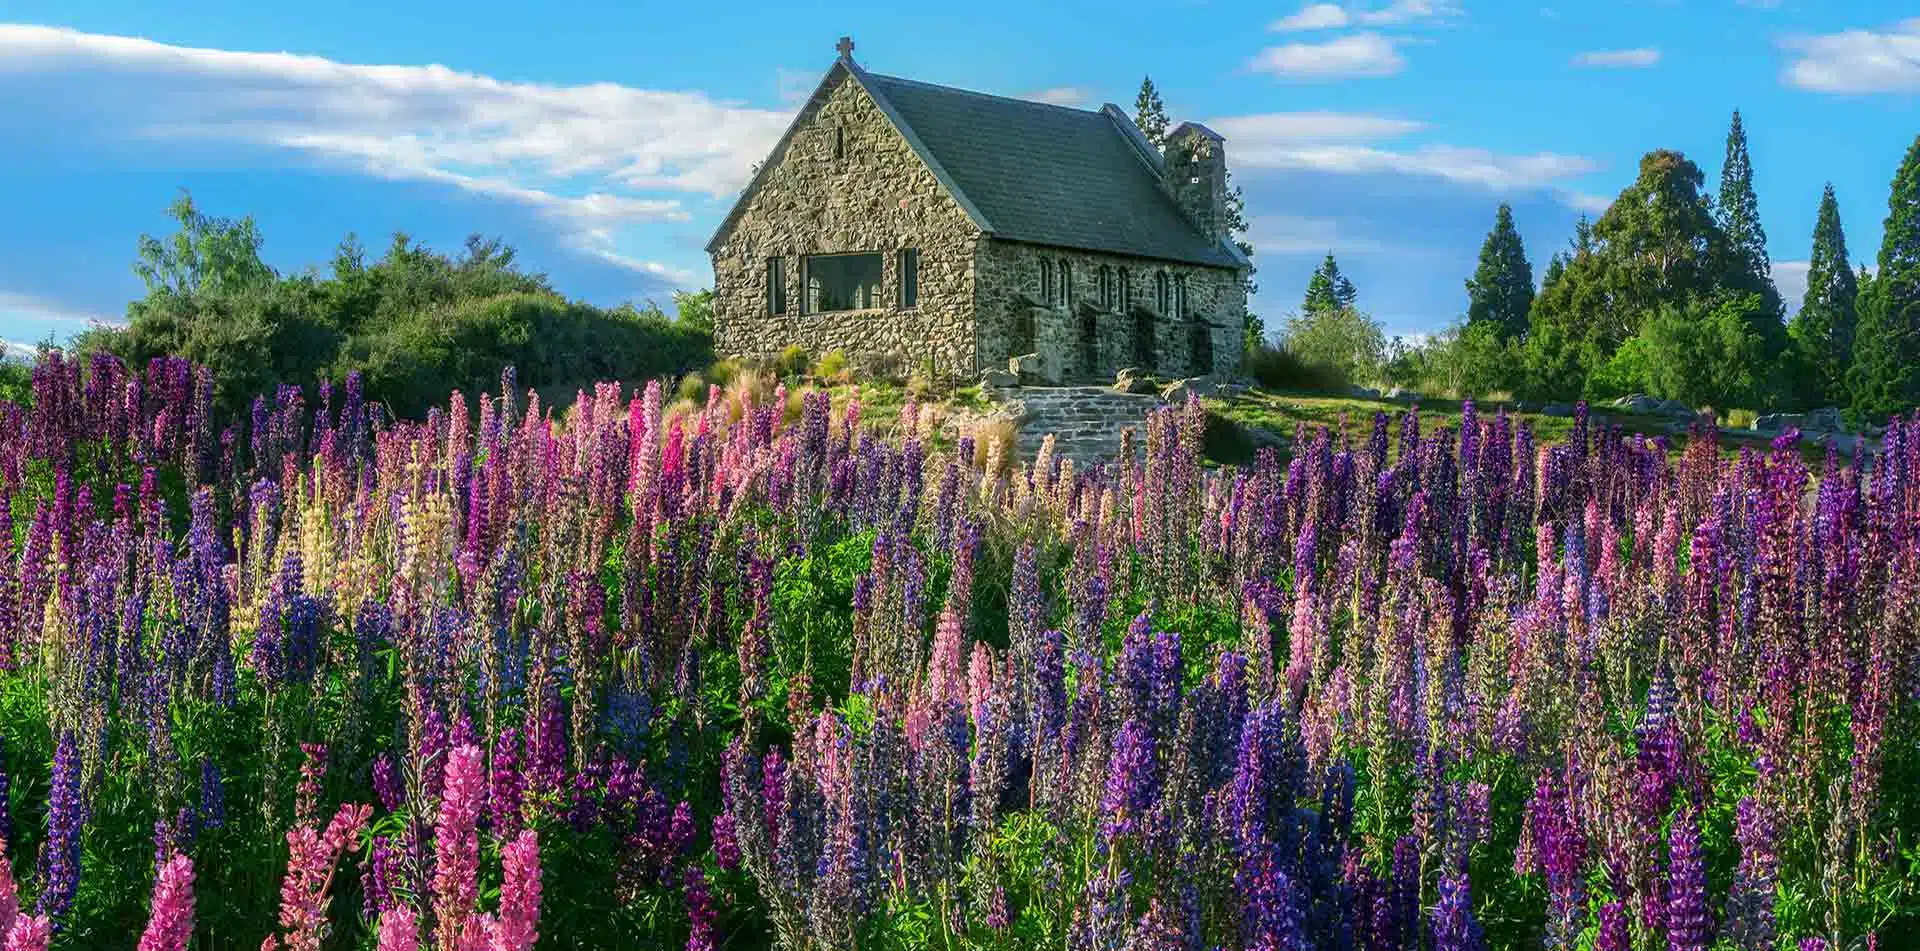 Lupine Fields and an old church in New Zealand